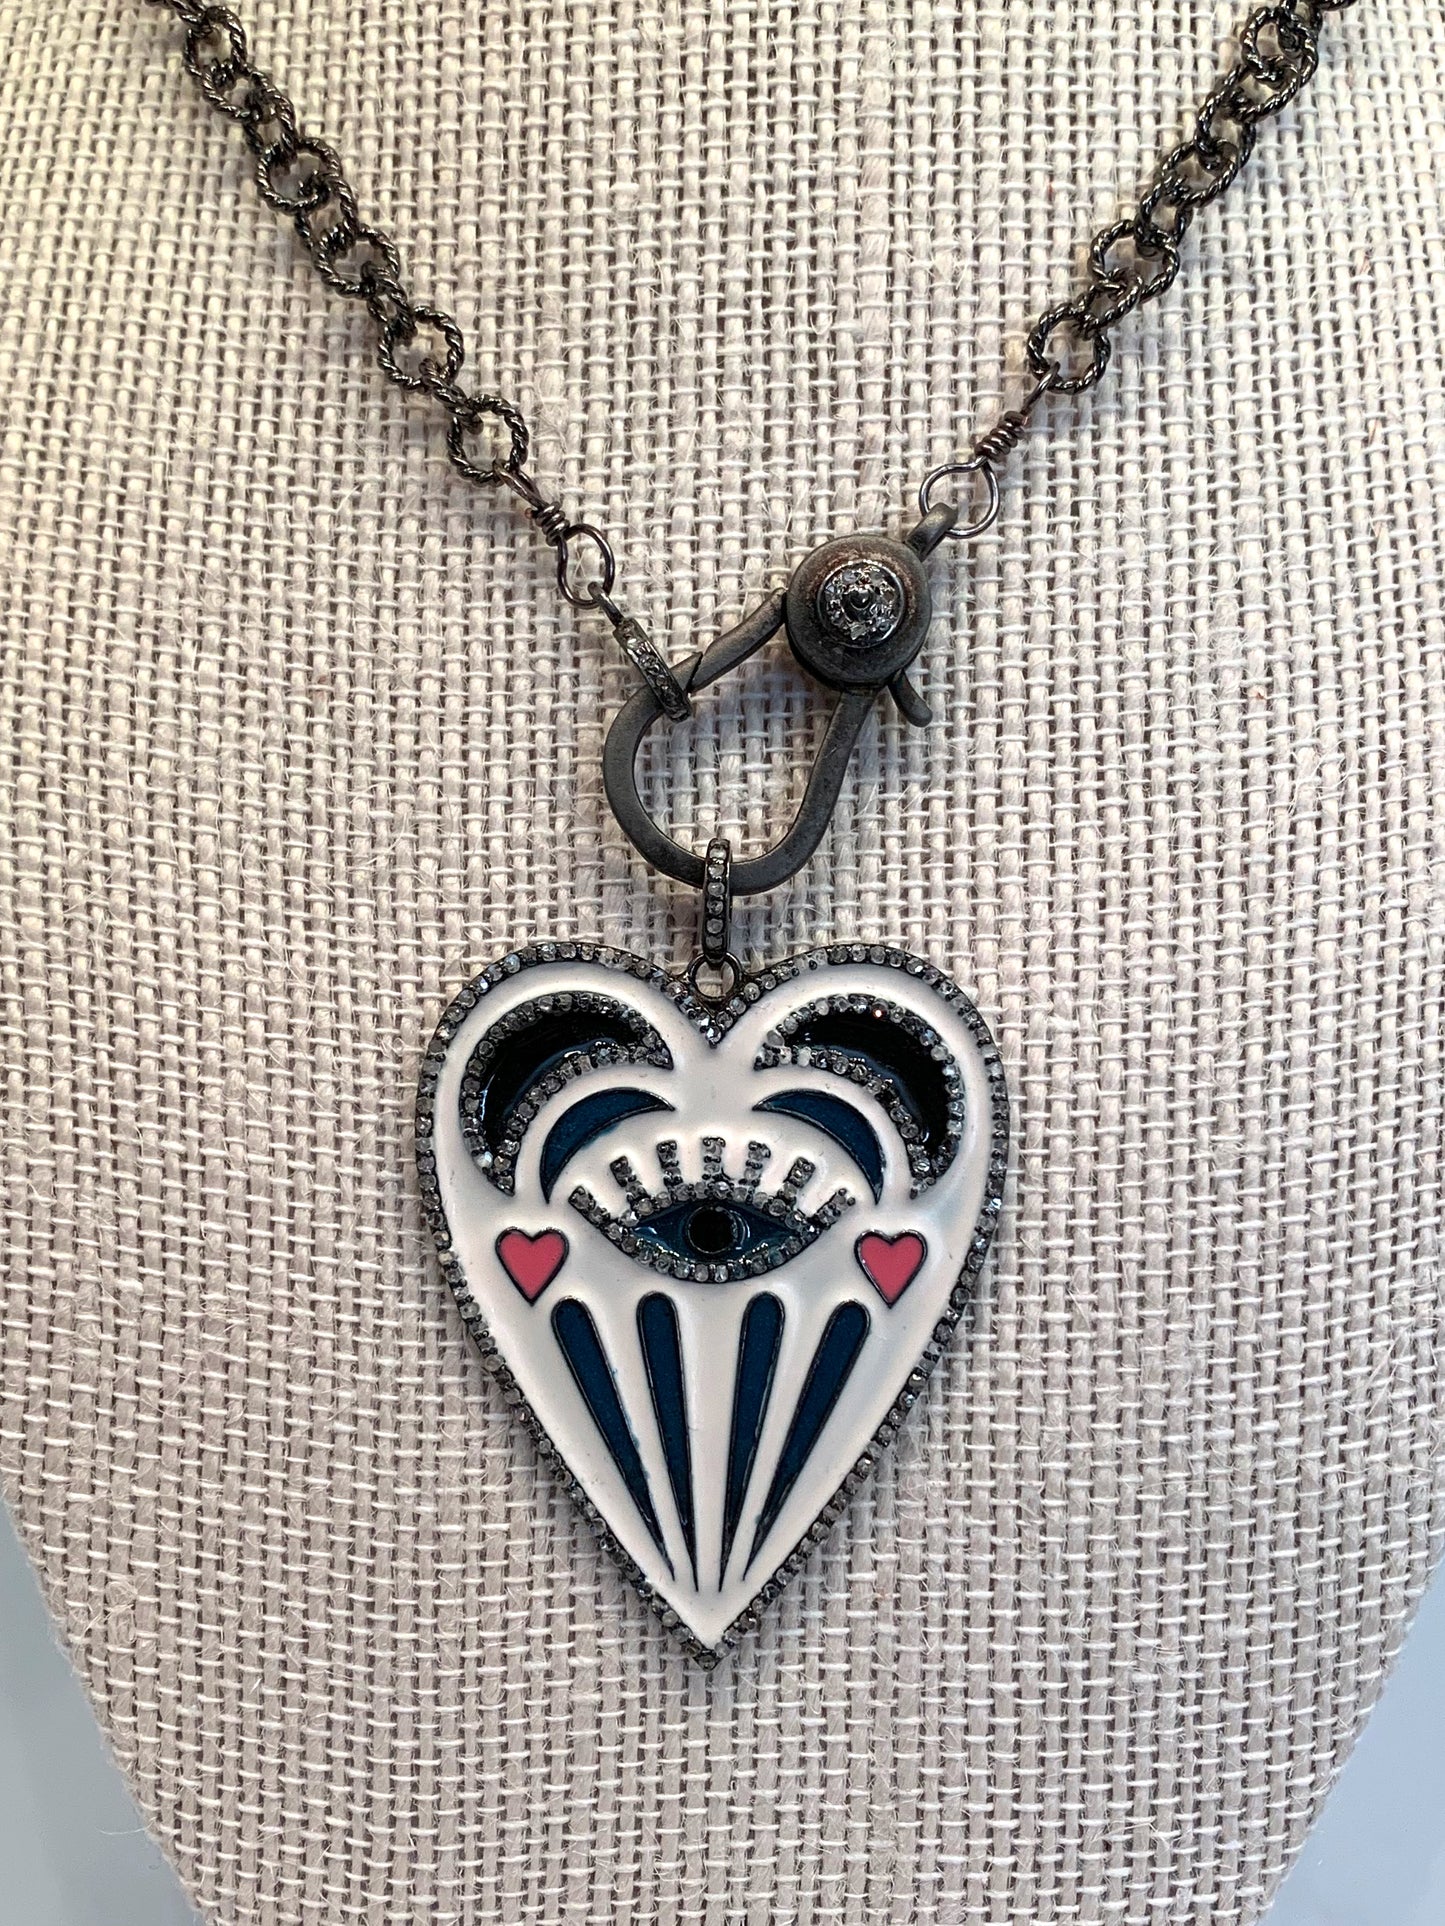 Oxidized Chain Necklace with a Pave Diamond Lobster Clasp and Enamel and Pave Diamond Evil Eye Heart Pendant